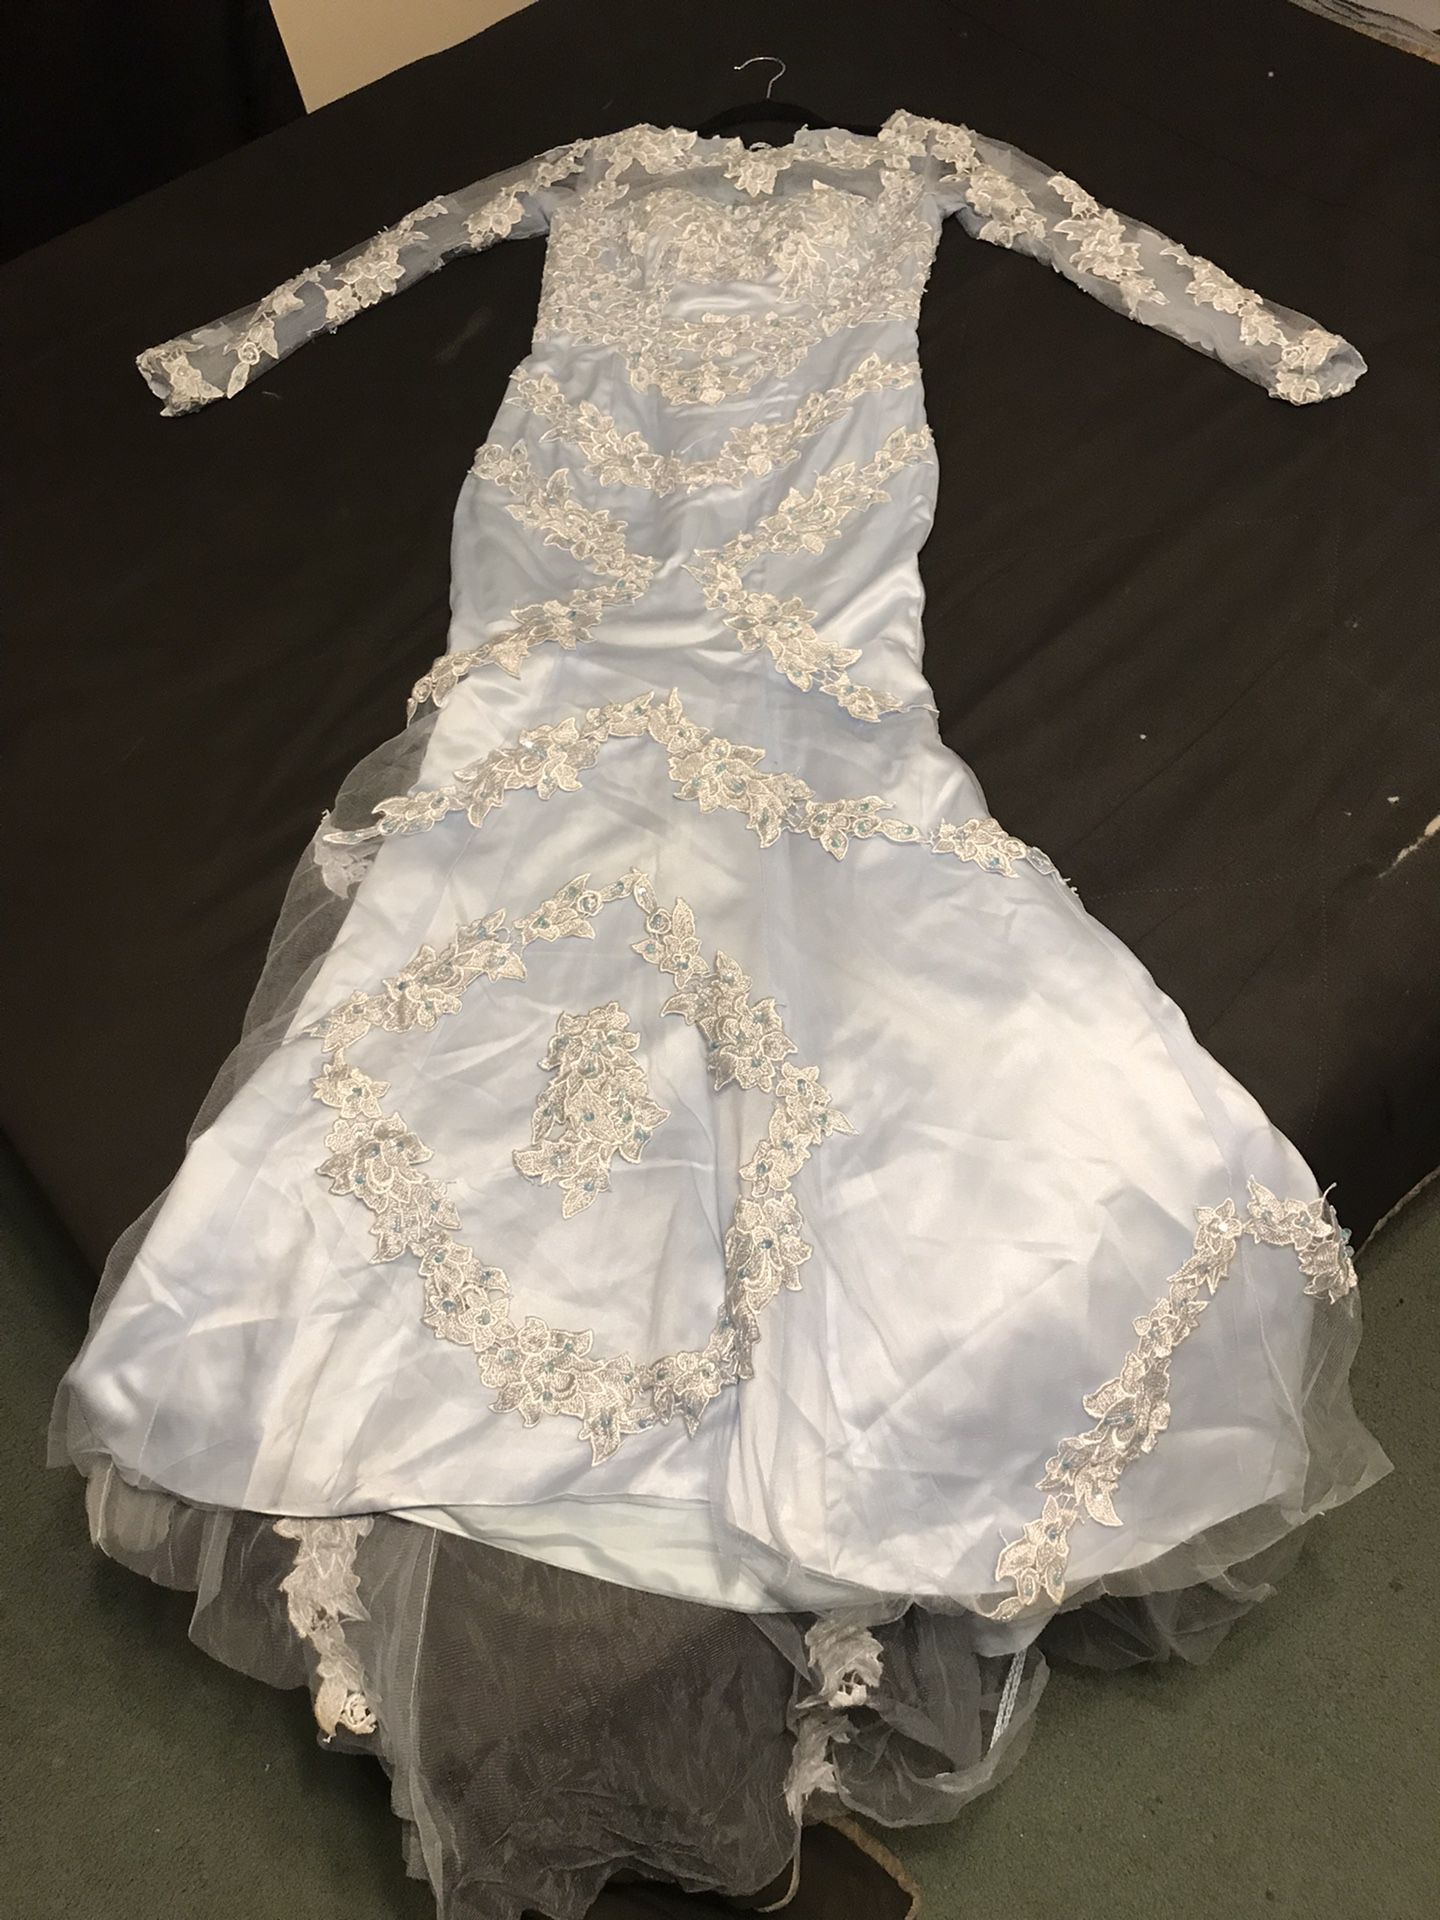 64” Long Beautiful Blue Floral Prom Style Dress w/ Fairly Long Train Lace/Zip Up